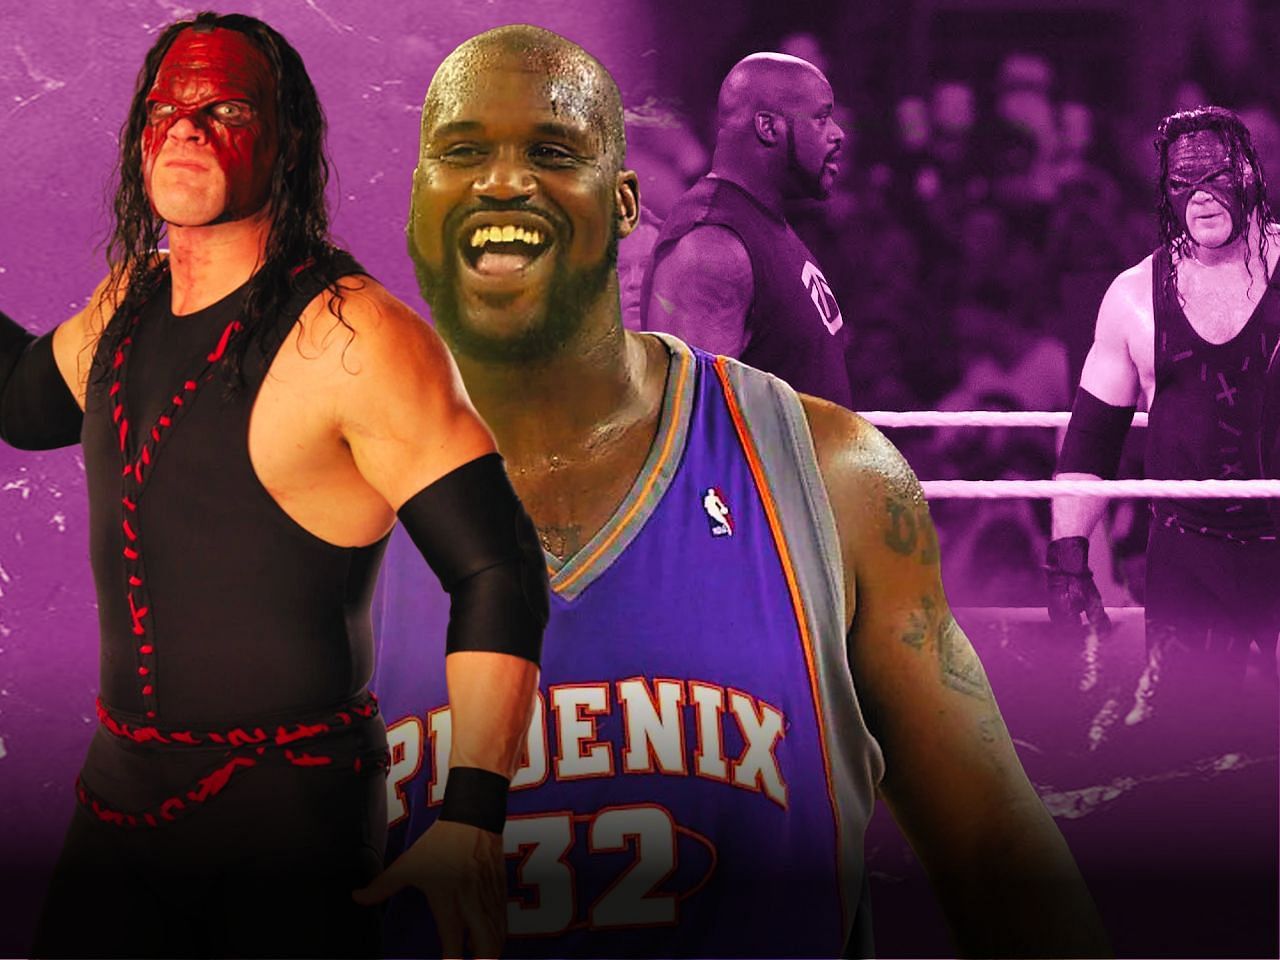 When Shaquille O'Neal stunned fans by slamming 7 foot WWE superstar